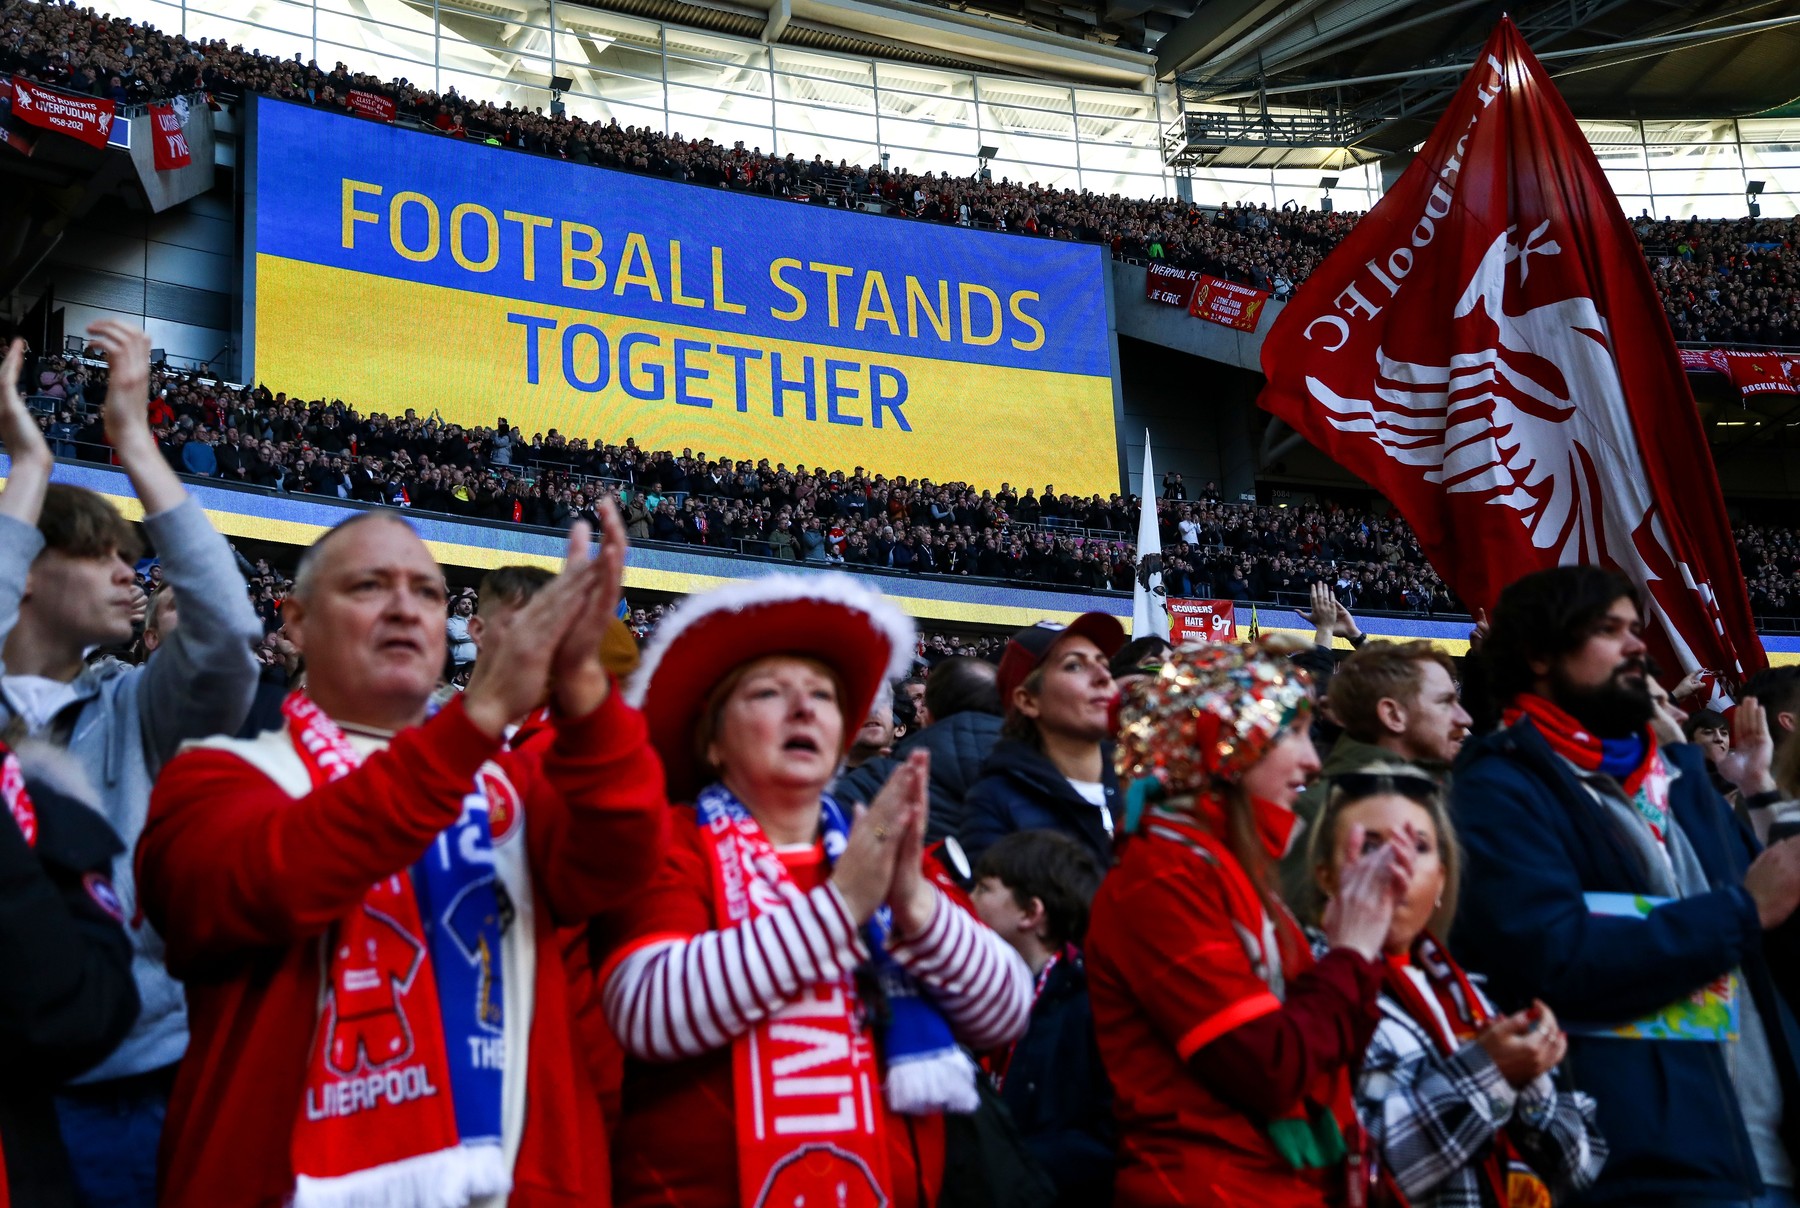 Large screen shows support for Ukraine above Liverpool fans
Chelsea v Liverpool, EFL Carabao Cup, Final, Football, Wembley Stadium, London, UK - 27 Feb 2022,Image: 665244390, License: Rights-managed, Restrictions: EDITORIAL USE ONLY No use with unauthorised audio, video, data, fixture lists, club/league logos or 